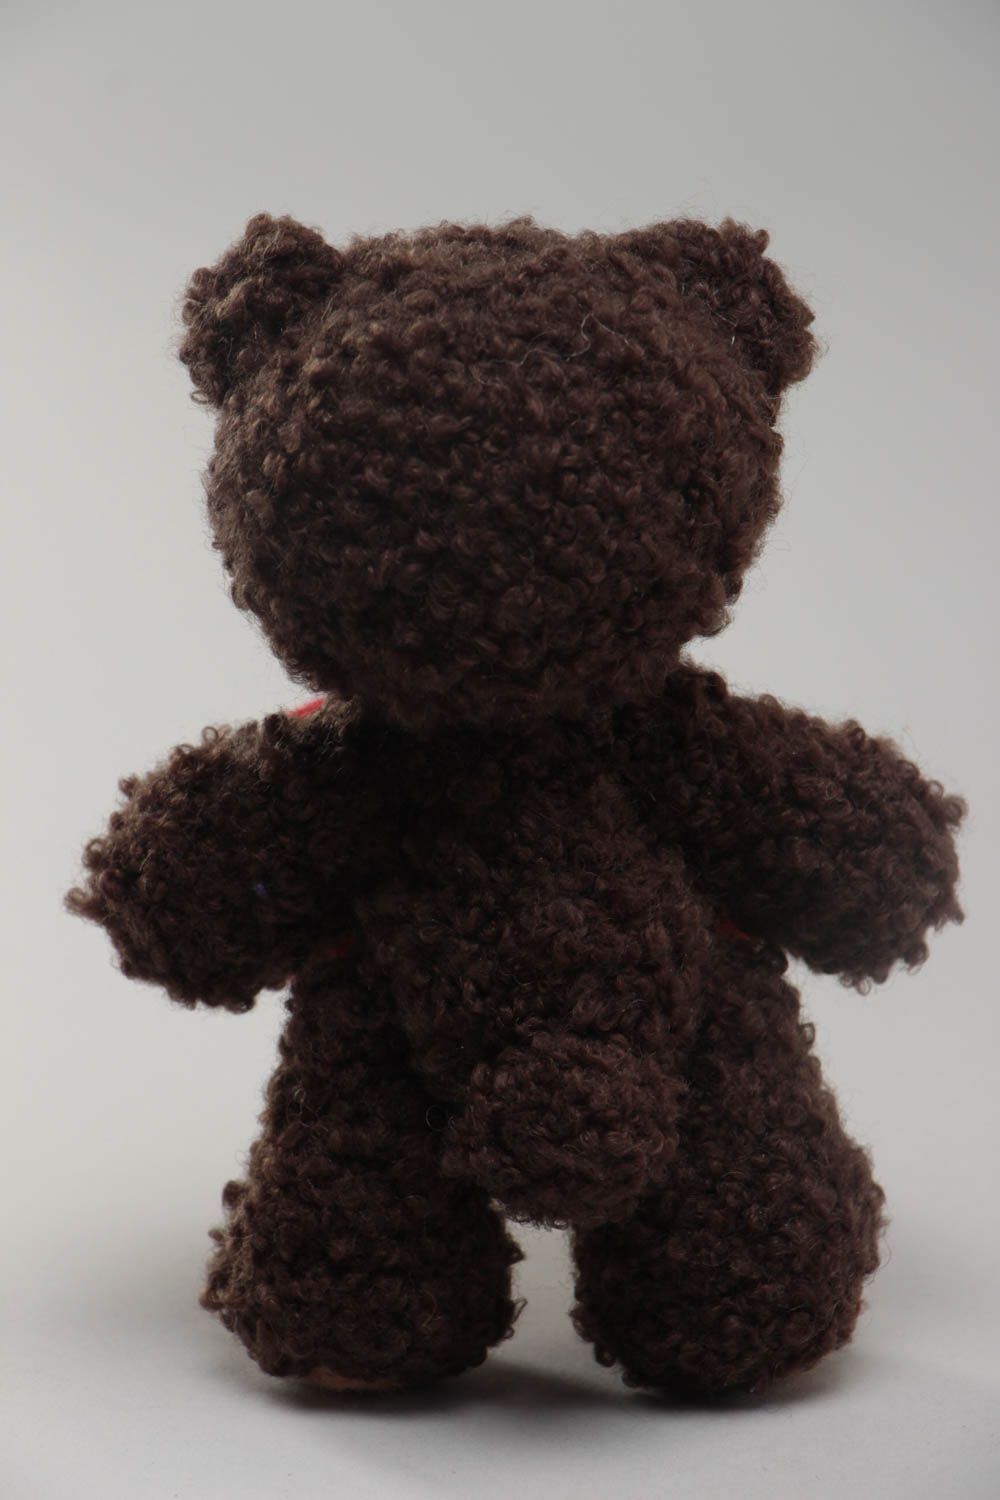 Handmade soft toy crocheted of wool and yarns brown bear with big red heart photo 4